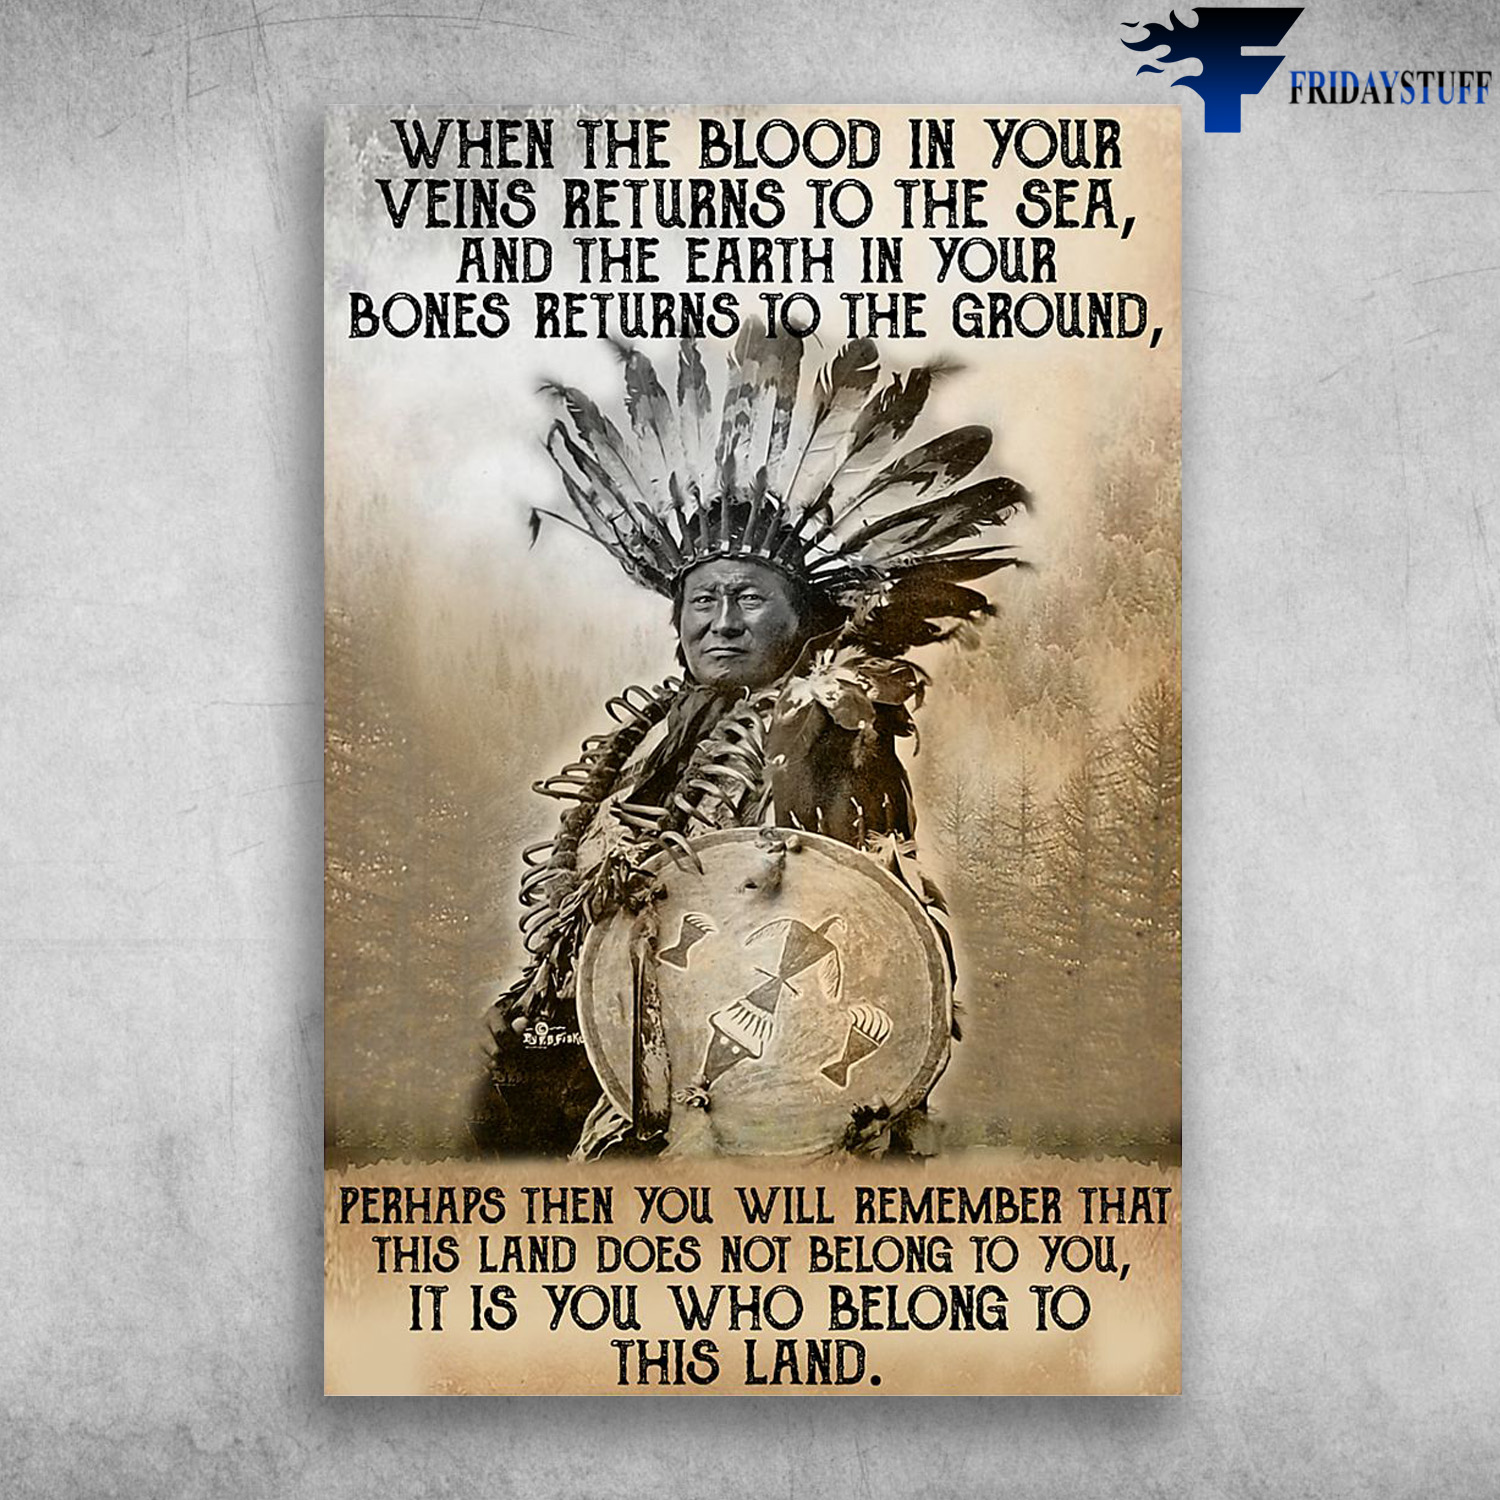 Native Americans - When The Blood In Your Veins Returns To The Sea, And The Earth In Your Bones Returns To The Ground, Perhaps Then You Will Remember That, This Land Does Not Belong To You, It Is You Who Belong To This Land